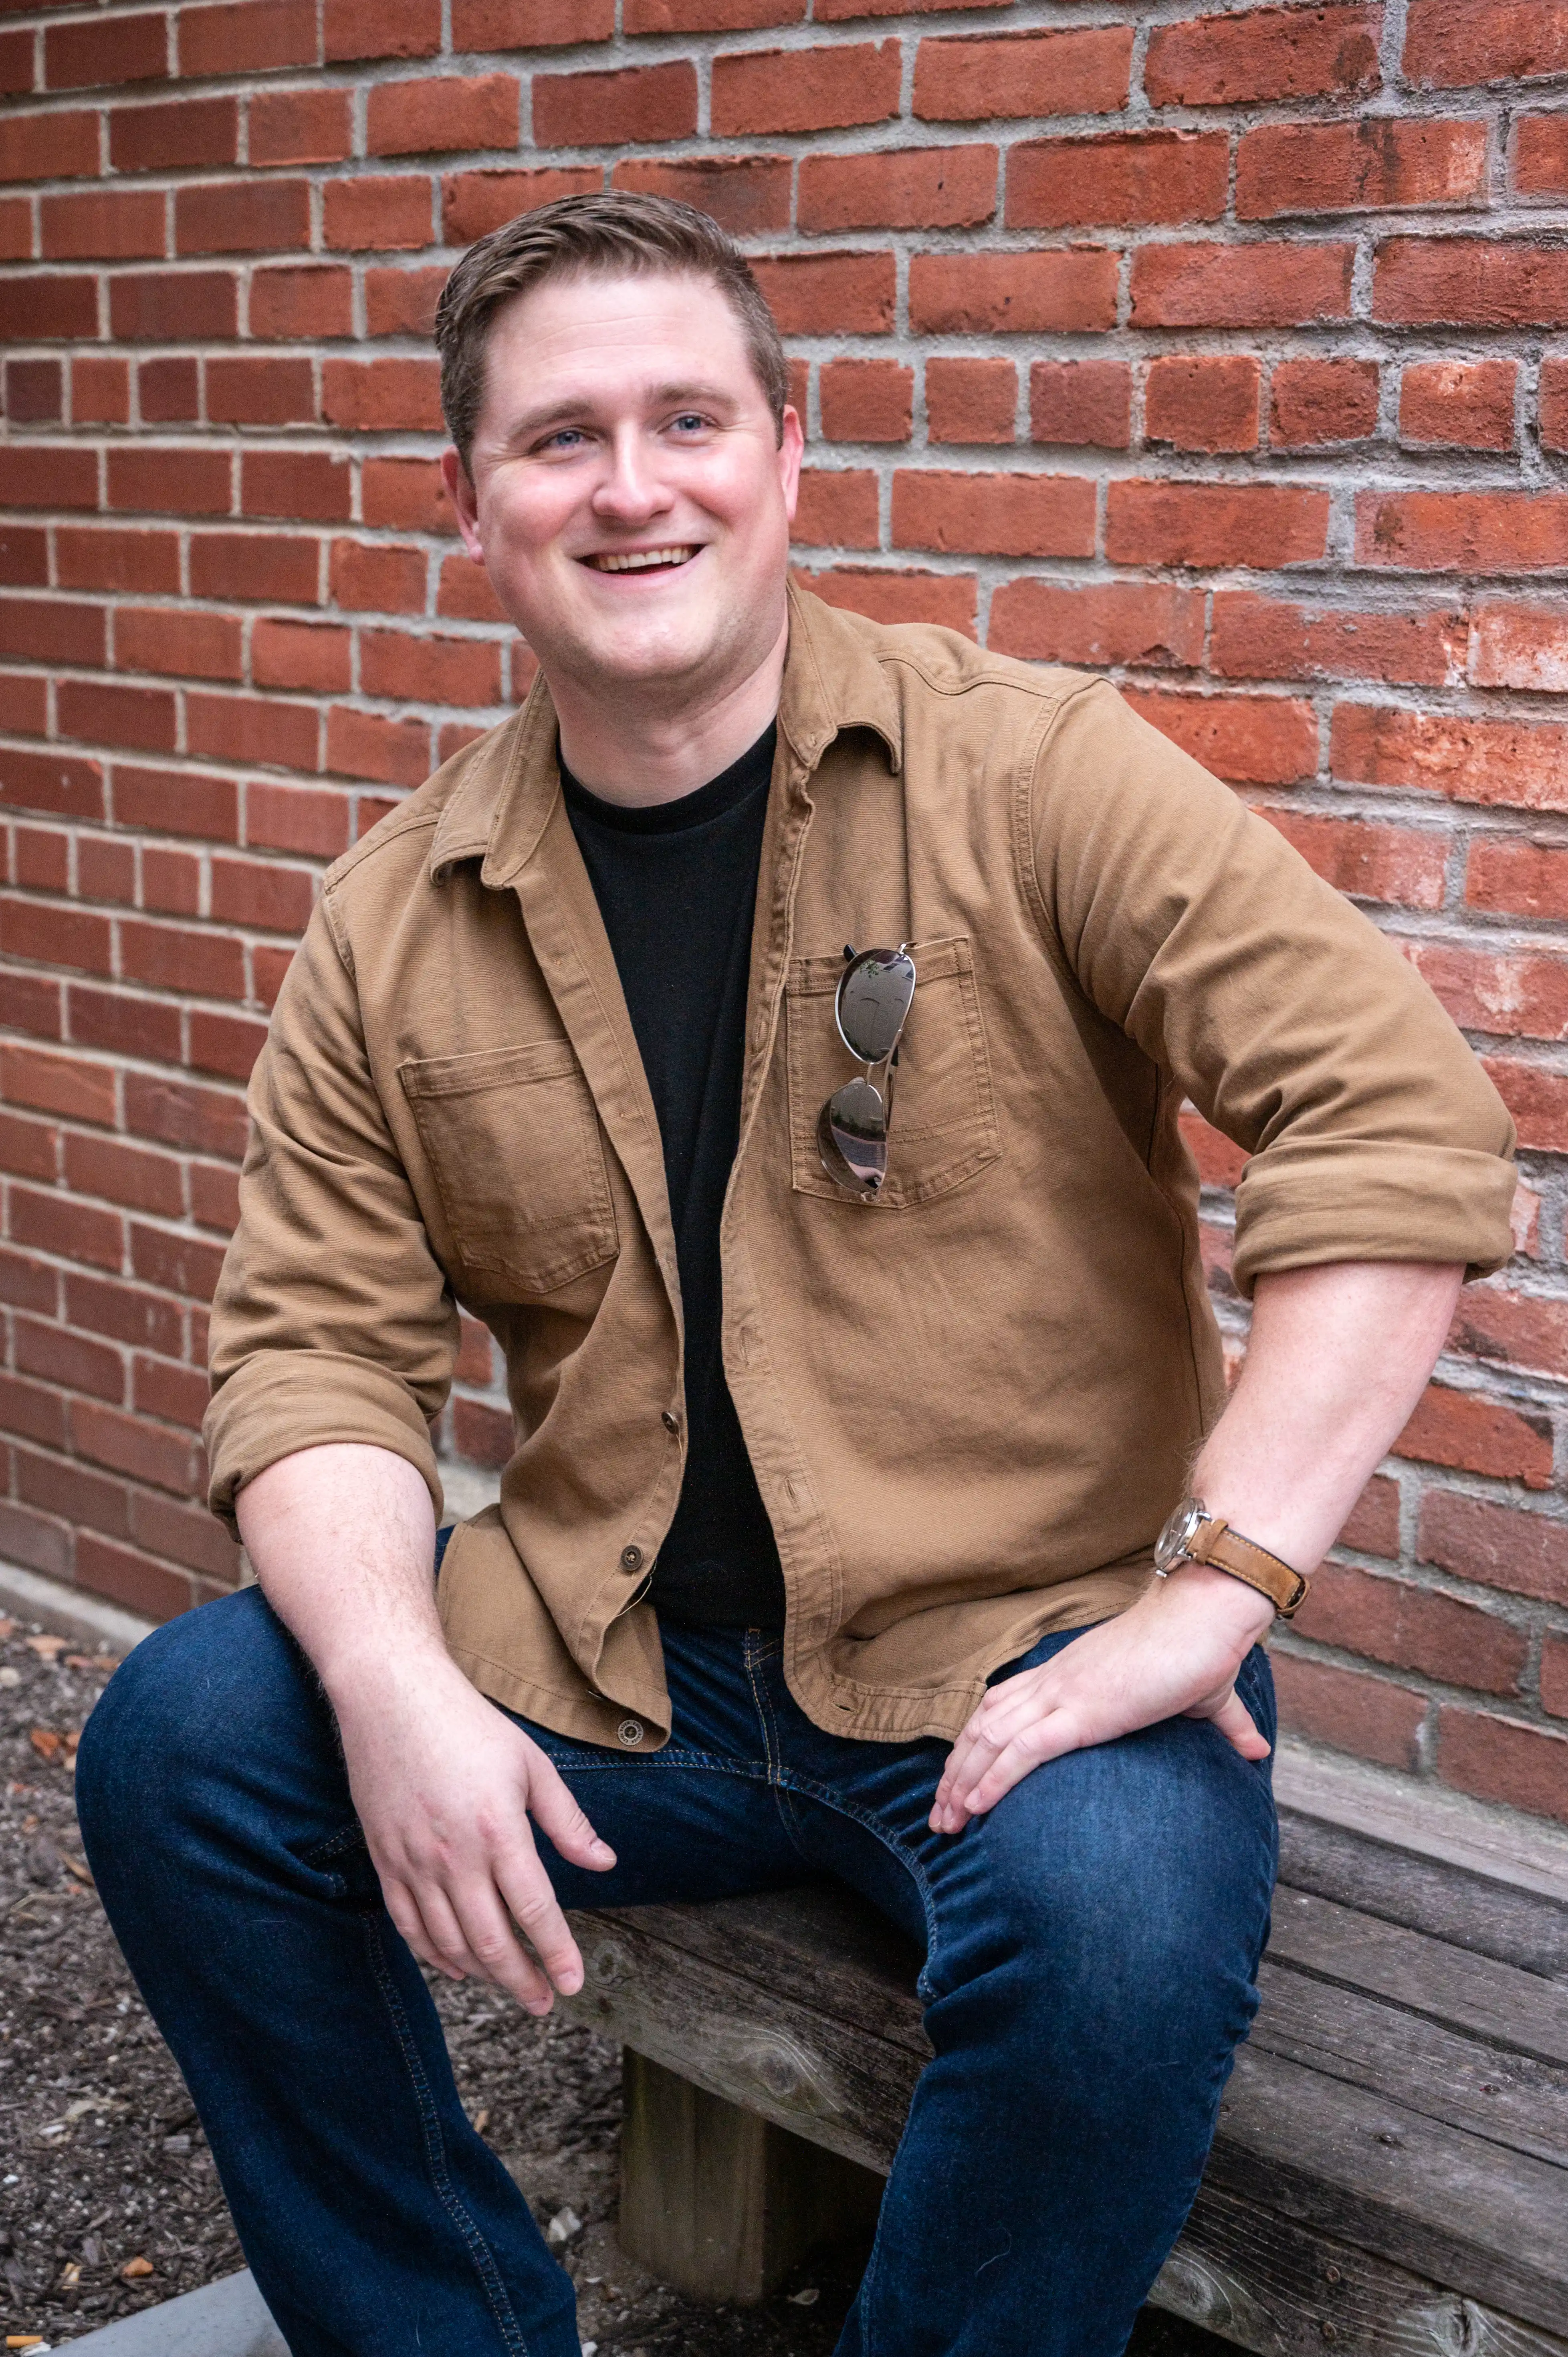 Man smiling at the camera while sitting on a step with a brick wall background.